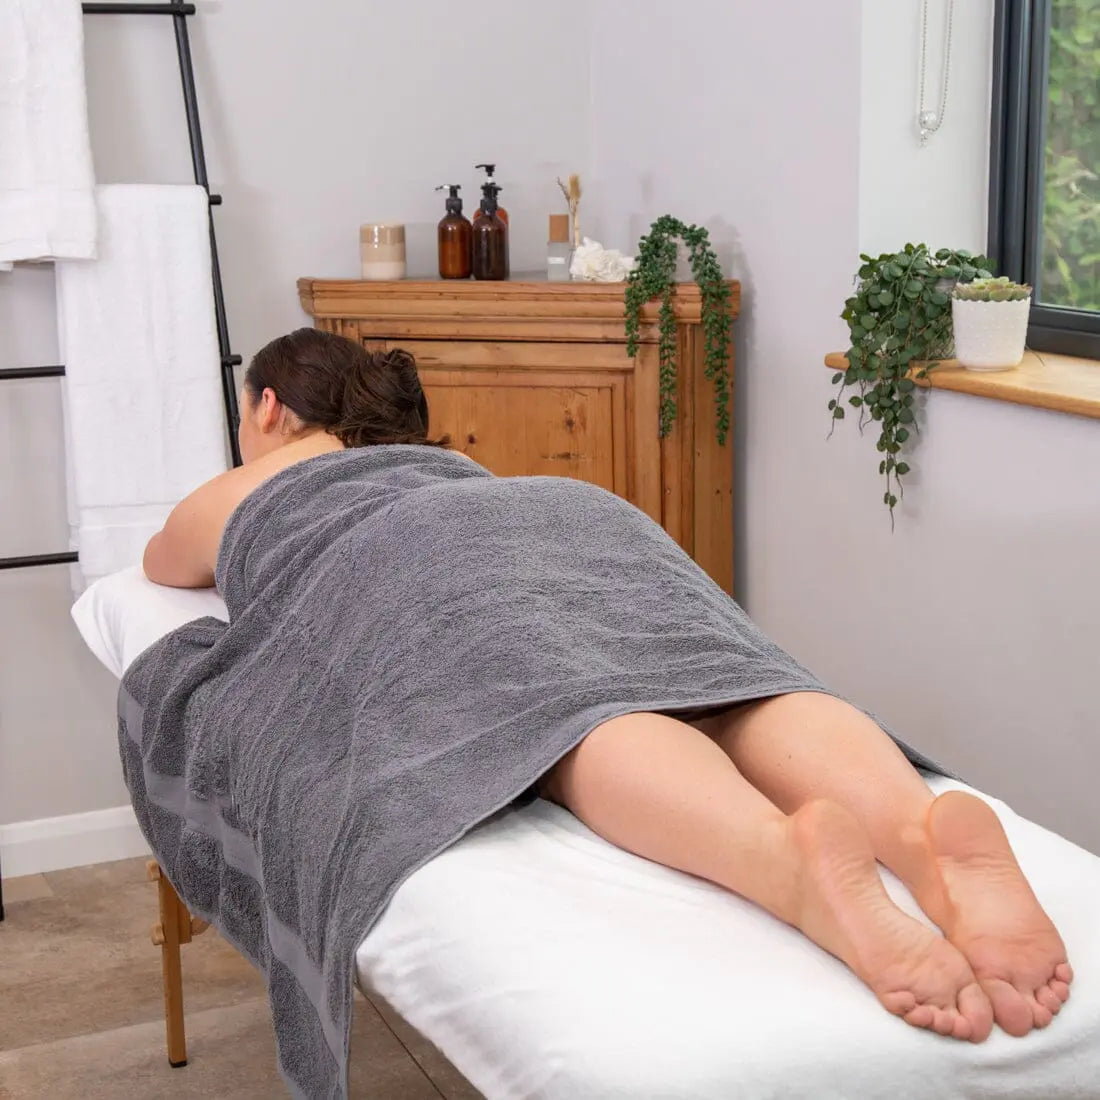 women on a massage bed, in a treatment room